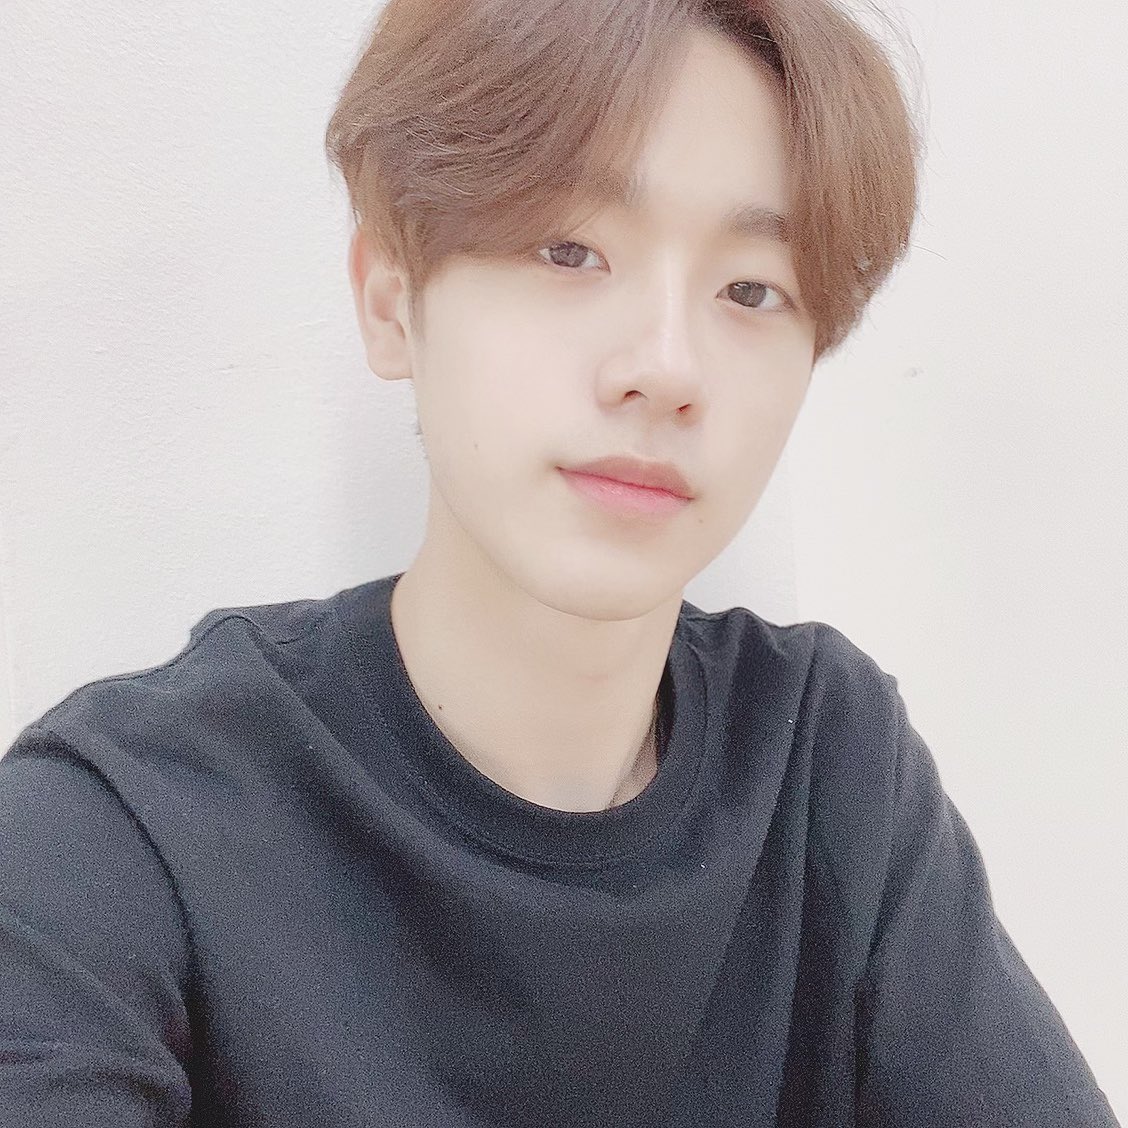 ˗ˏˋ 108/365 ♡ ˎˊ˗ ➣ how are your selfies so soft ;; you look like an angel